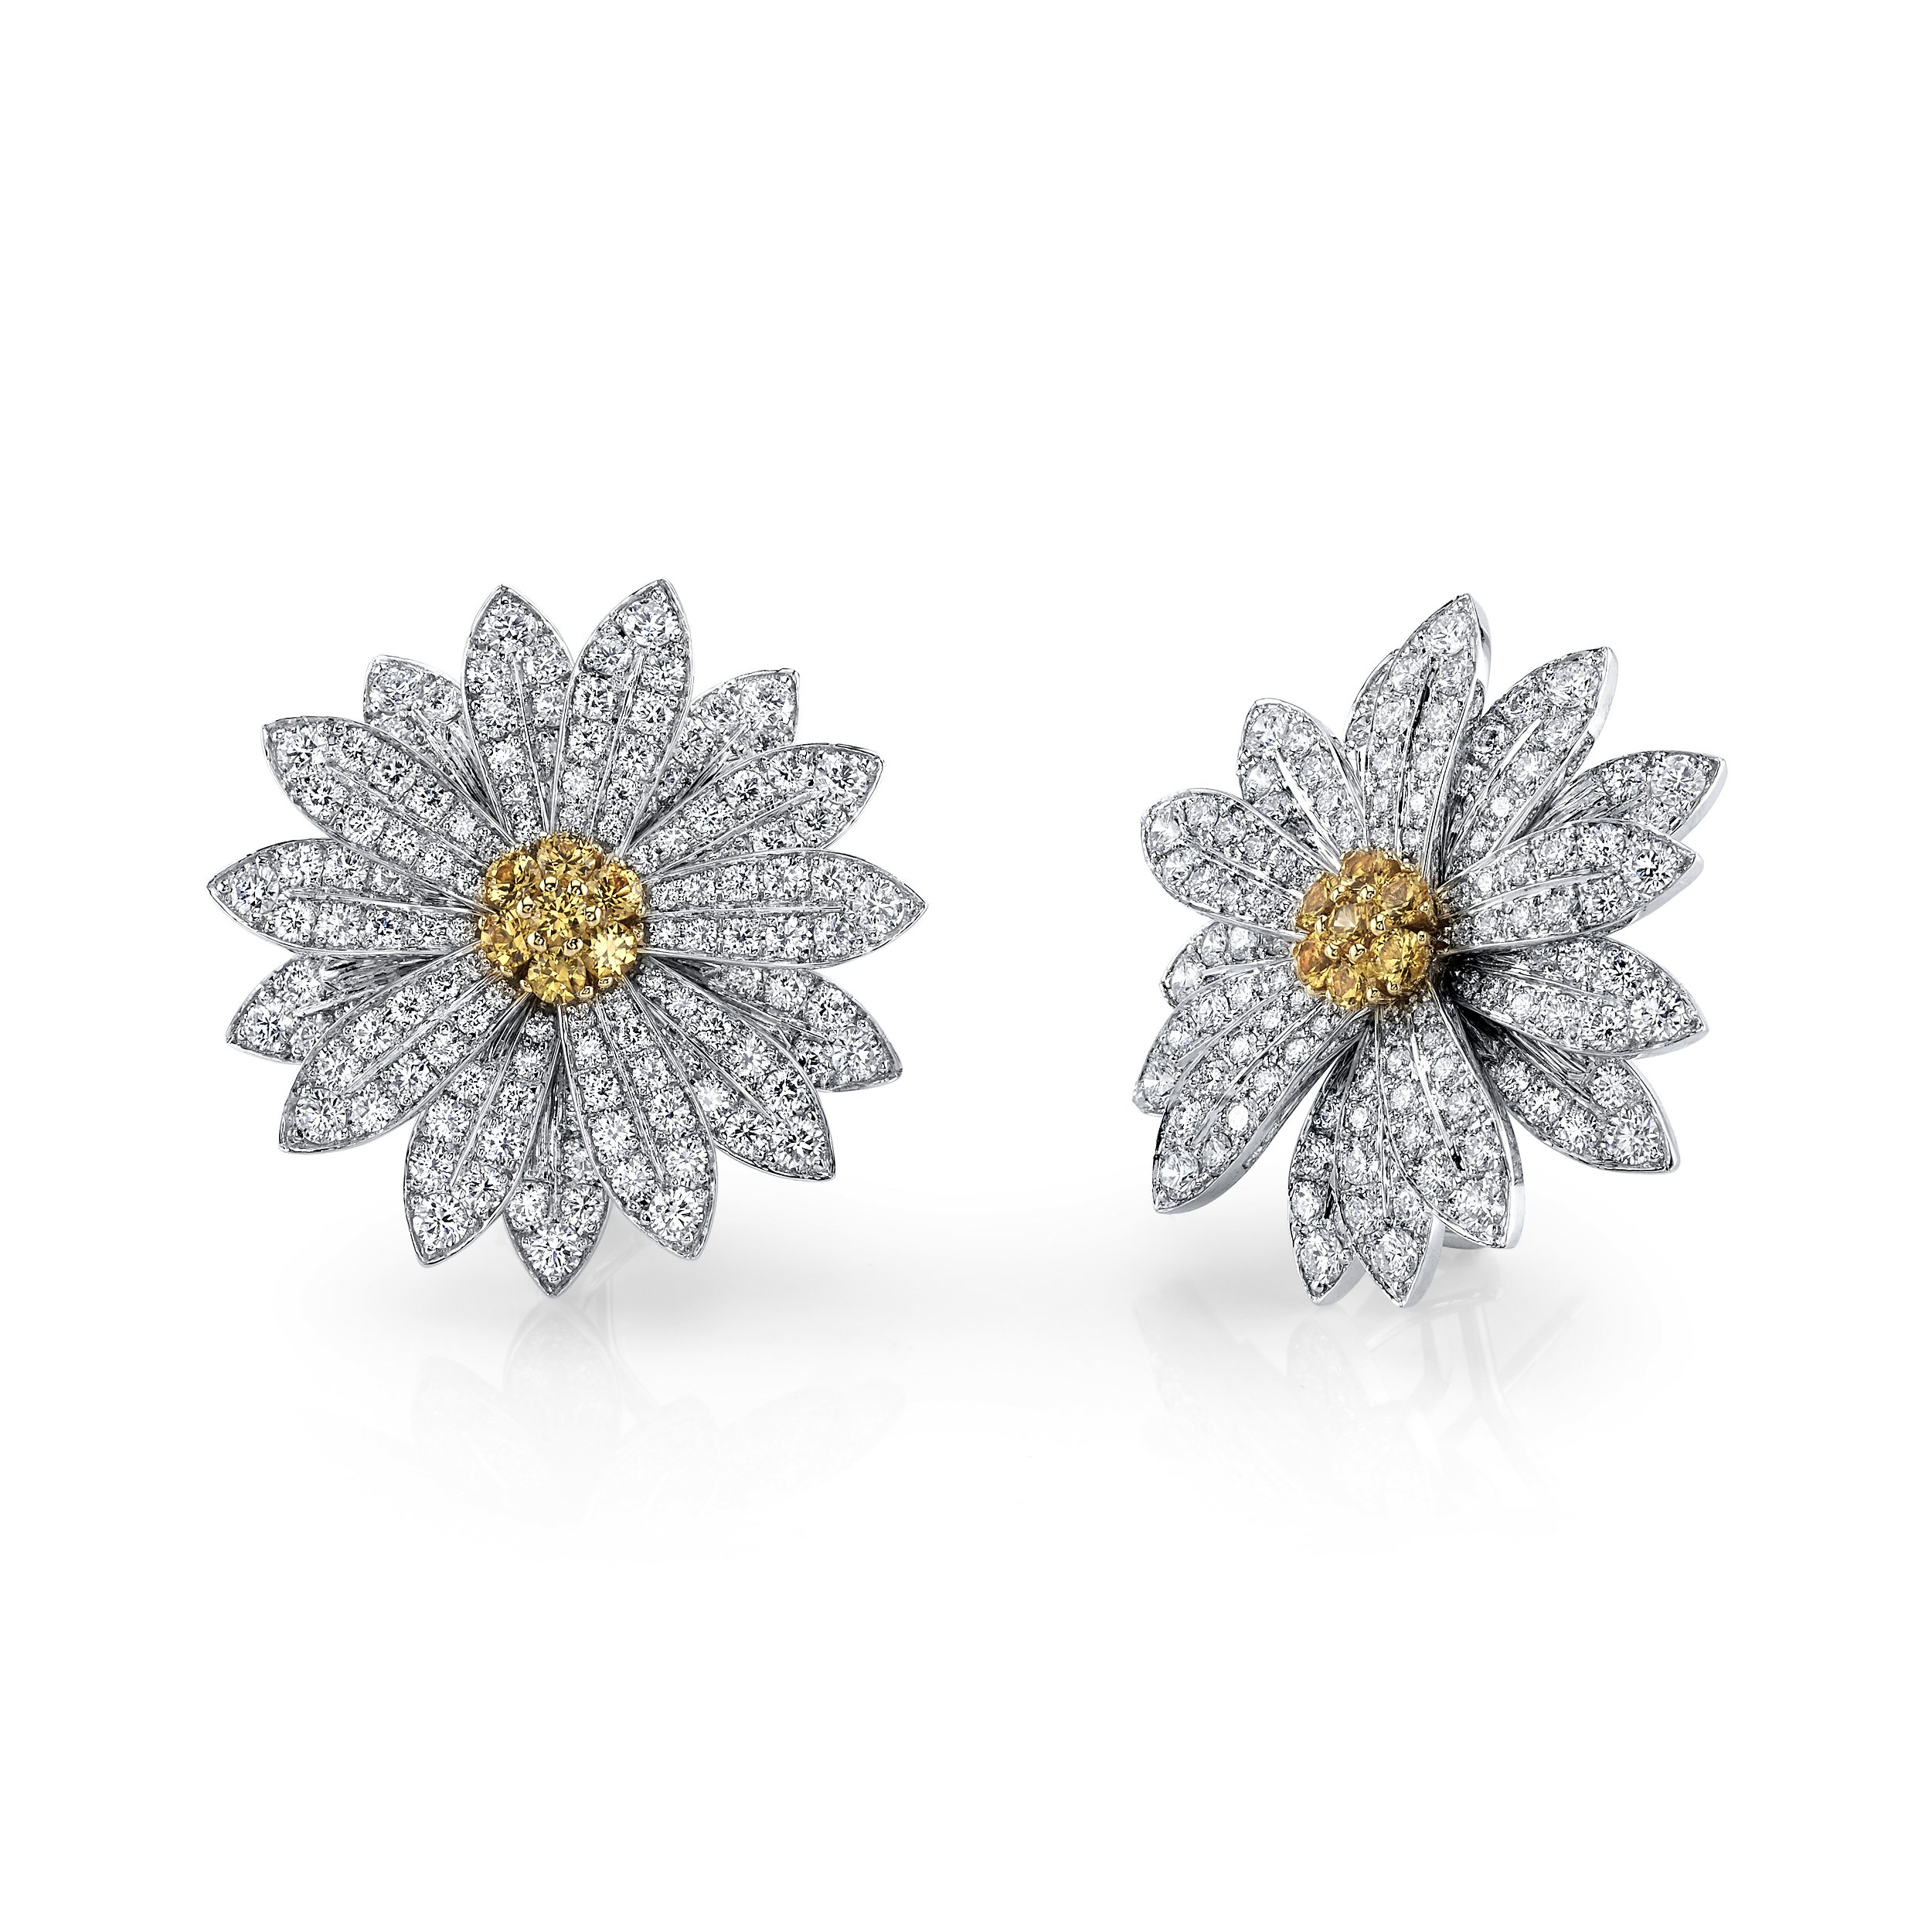 Diamond Pave Large Daisy Earrings with Yellow Sapphire Centers in 18kt White Gold